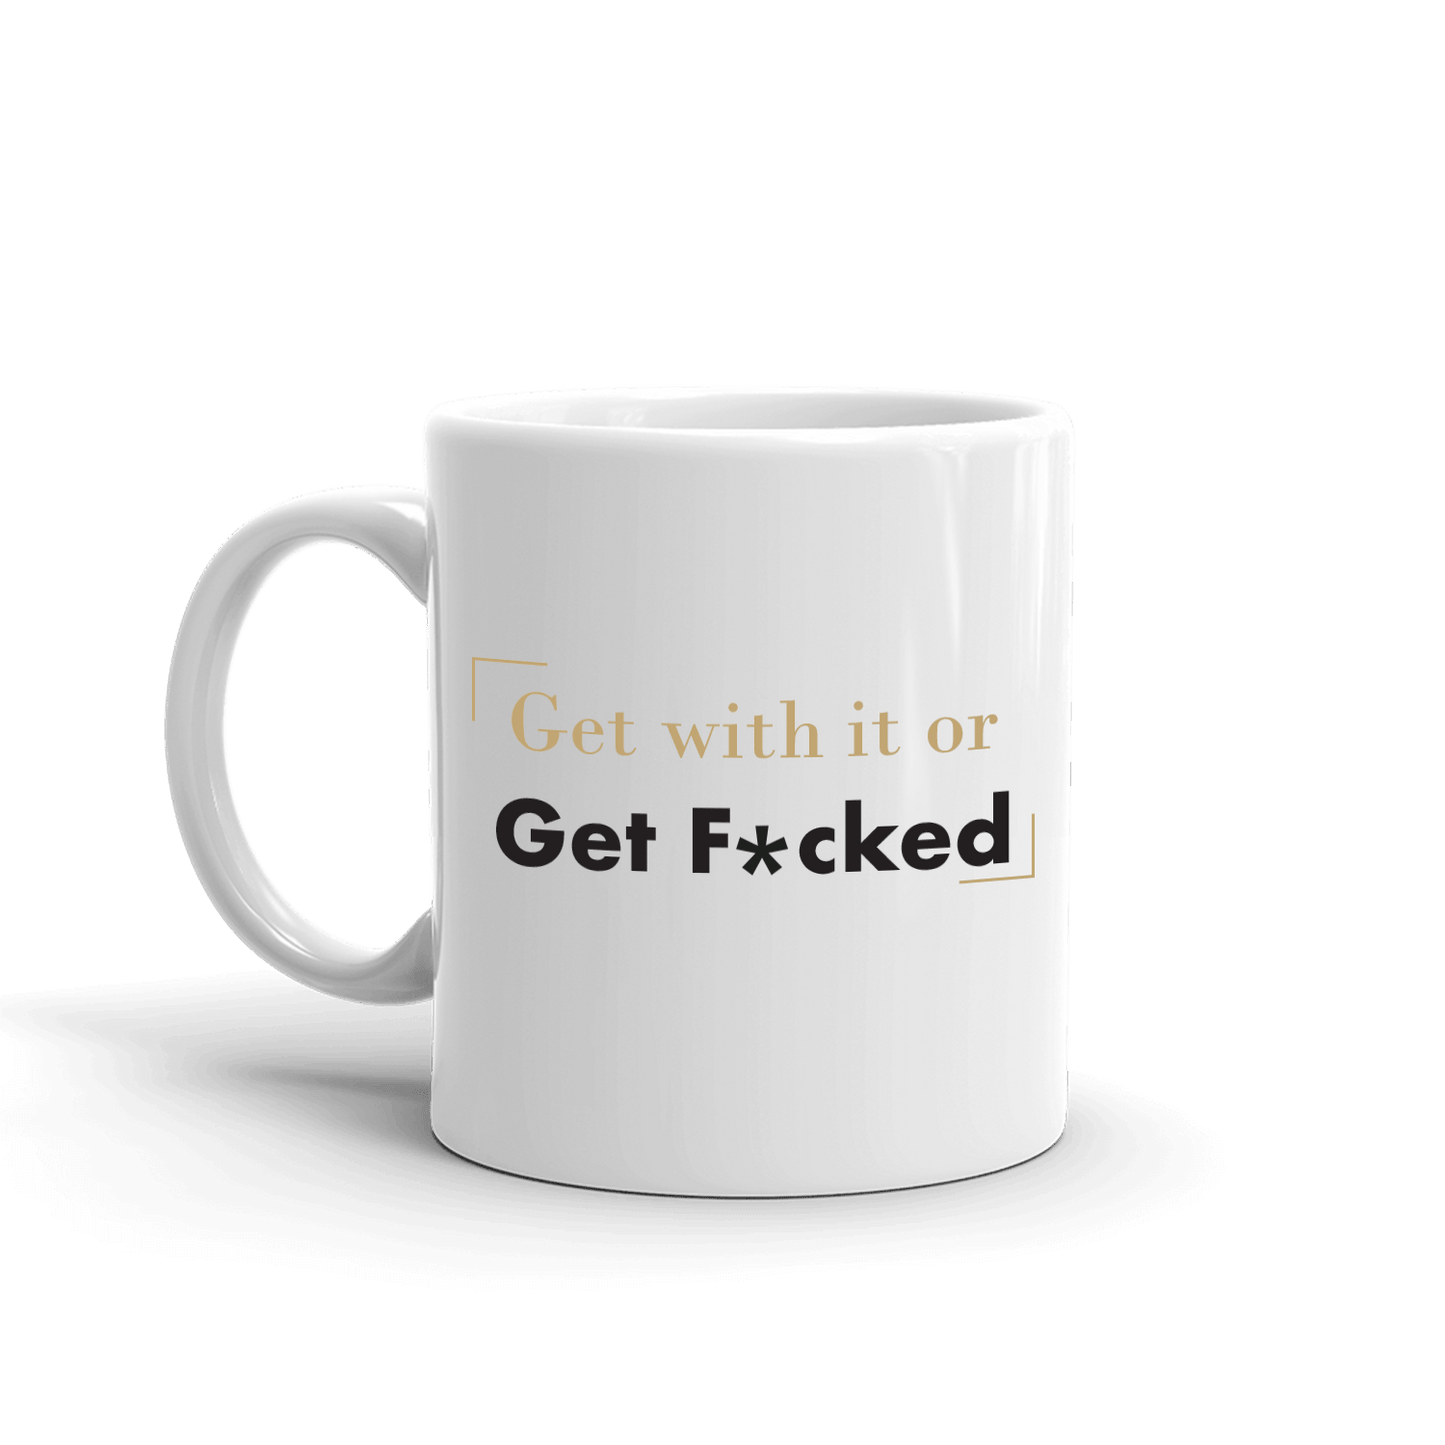 Billions Get With it or Get F*cked White Mug - Paramount Shop